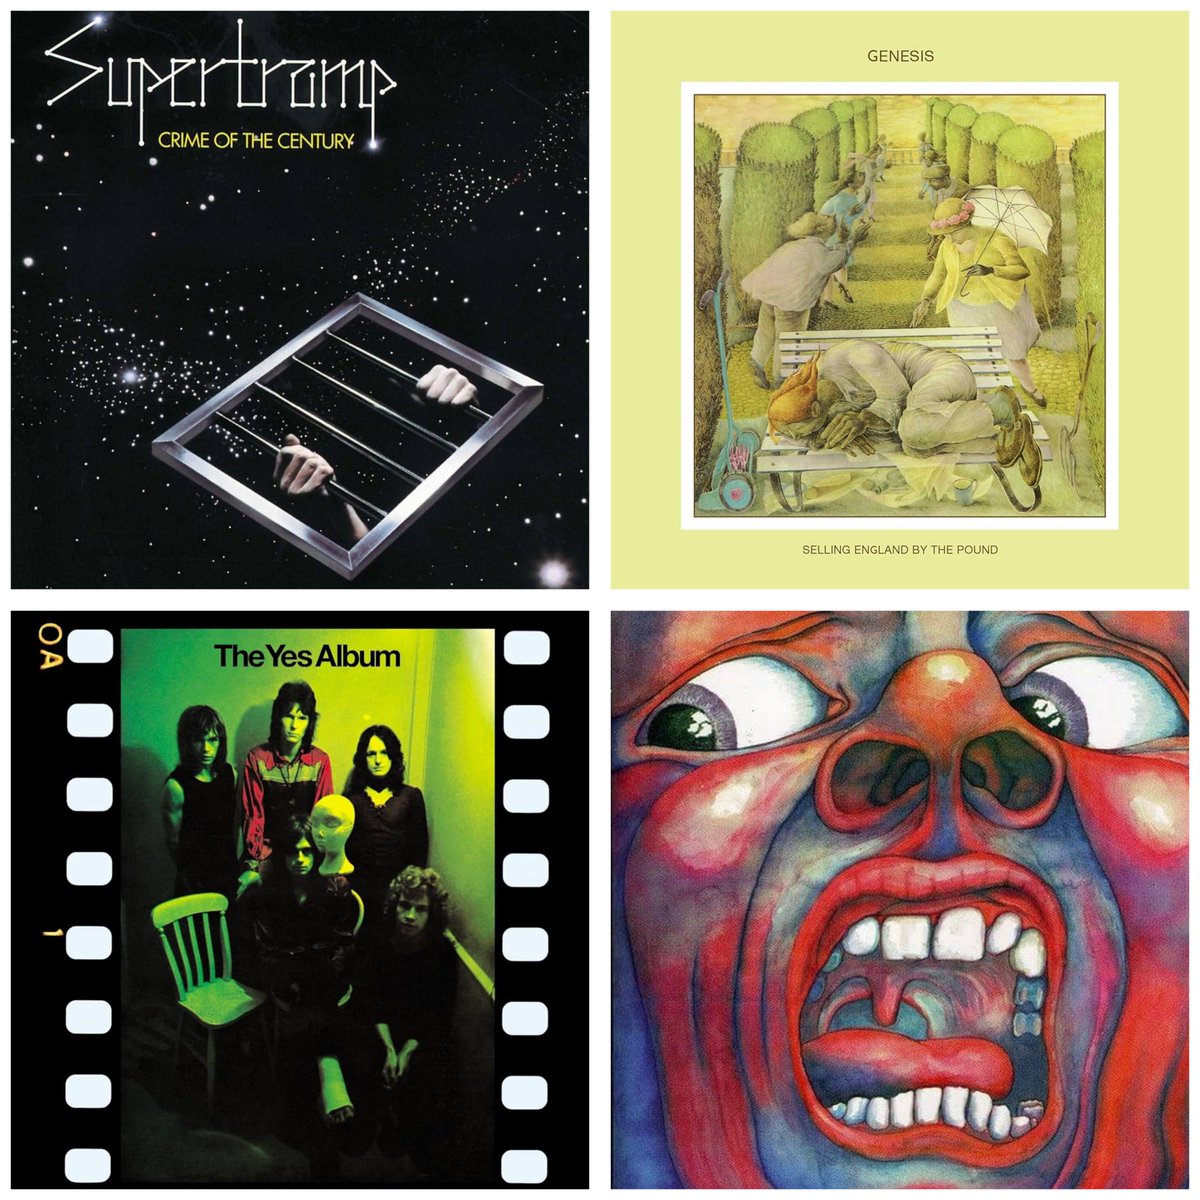 Hello everyone! Which of these albums do you prefer?

👉 Supertramp - Crime Of The Century 
👉 Genesis - Selling England By The Pound 
👉 Yes - The Yes Album 
👉 King Crimson - In The Court Of The Crimson King